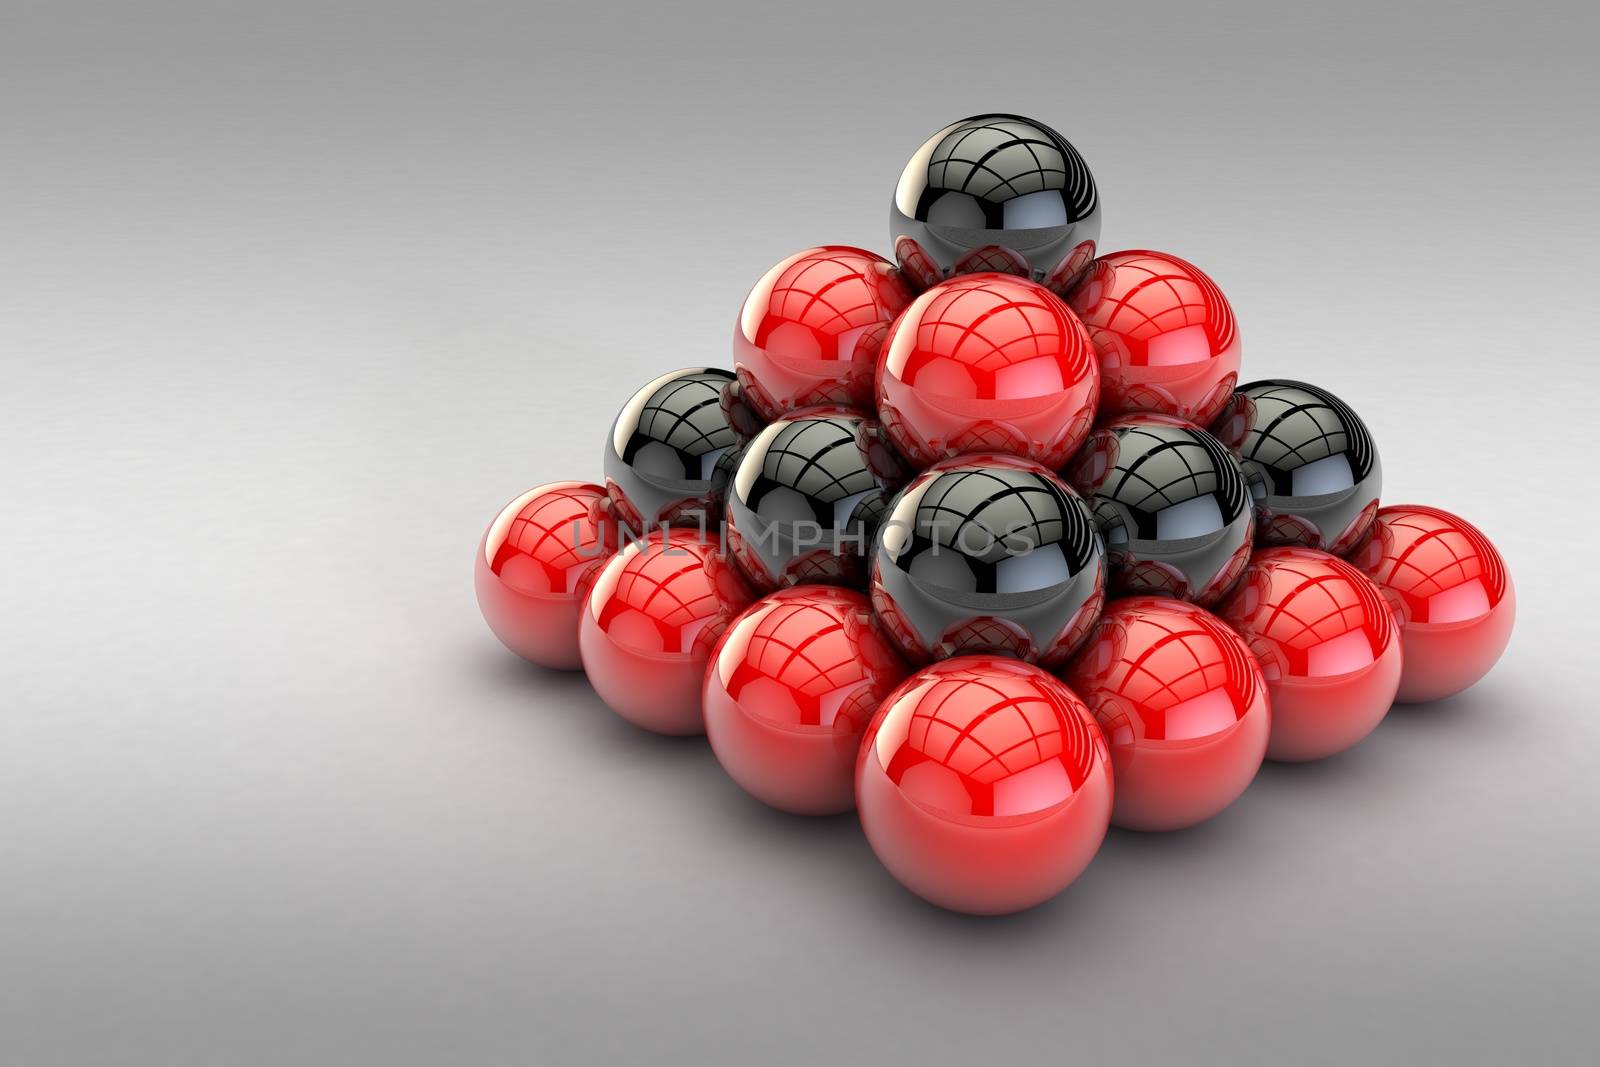 3D image of a pyramid of red and black balls in empty space